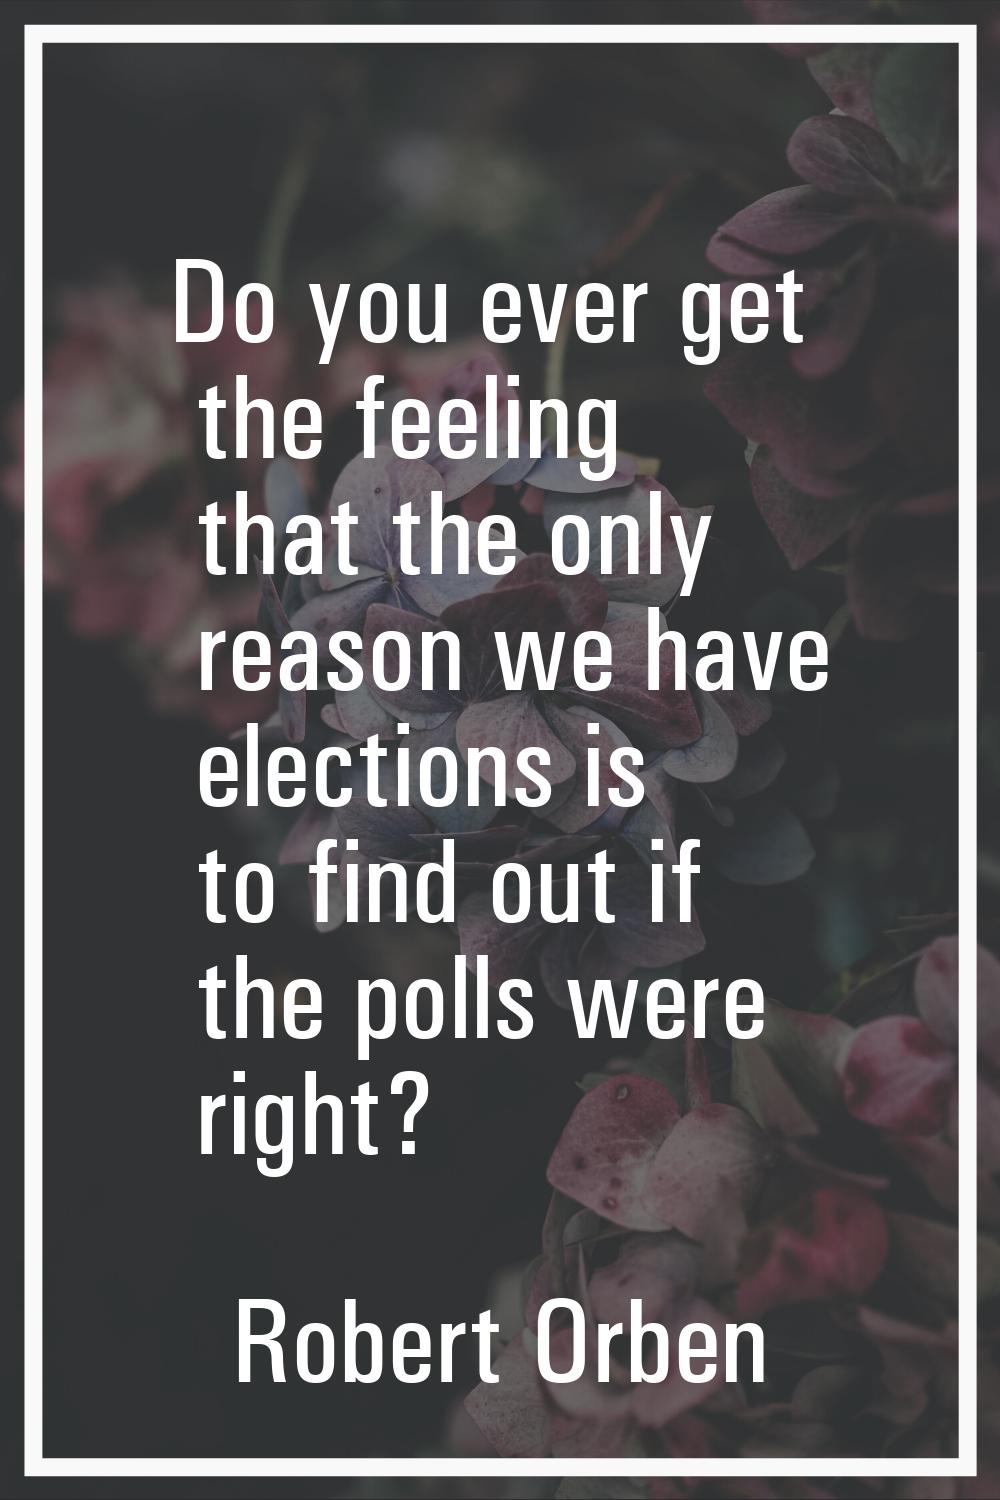 Do you ever get the feeling that the only reason we have elections is to find out if the polls were